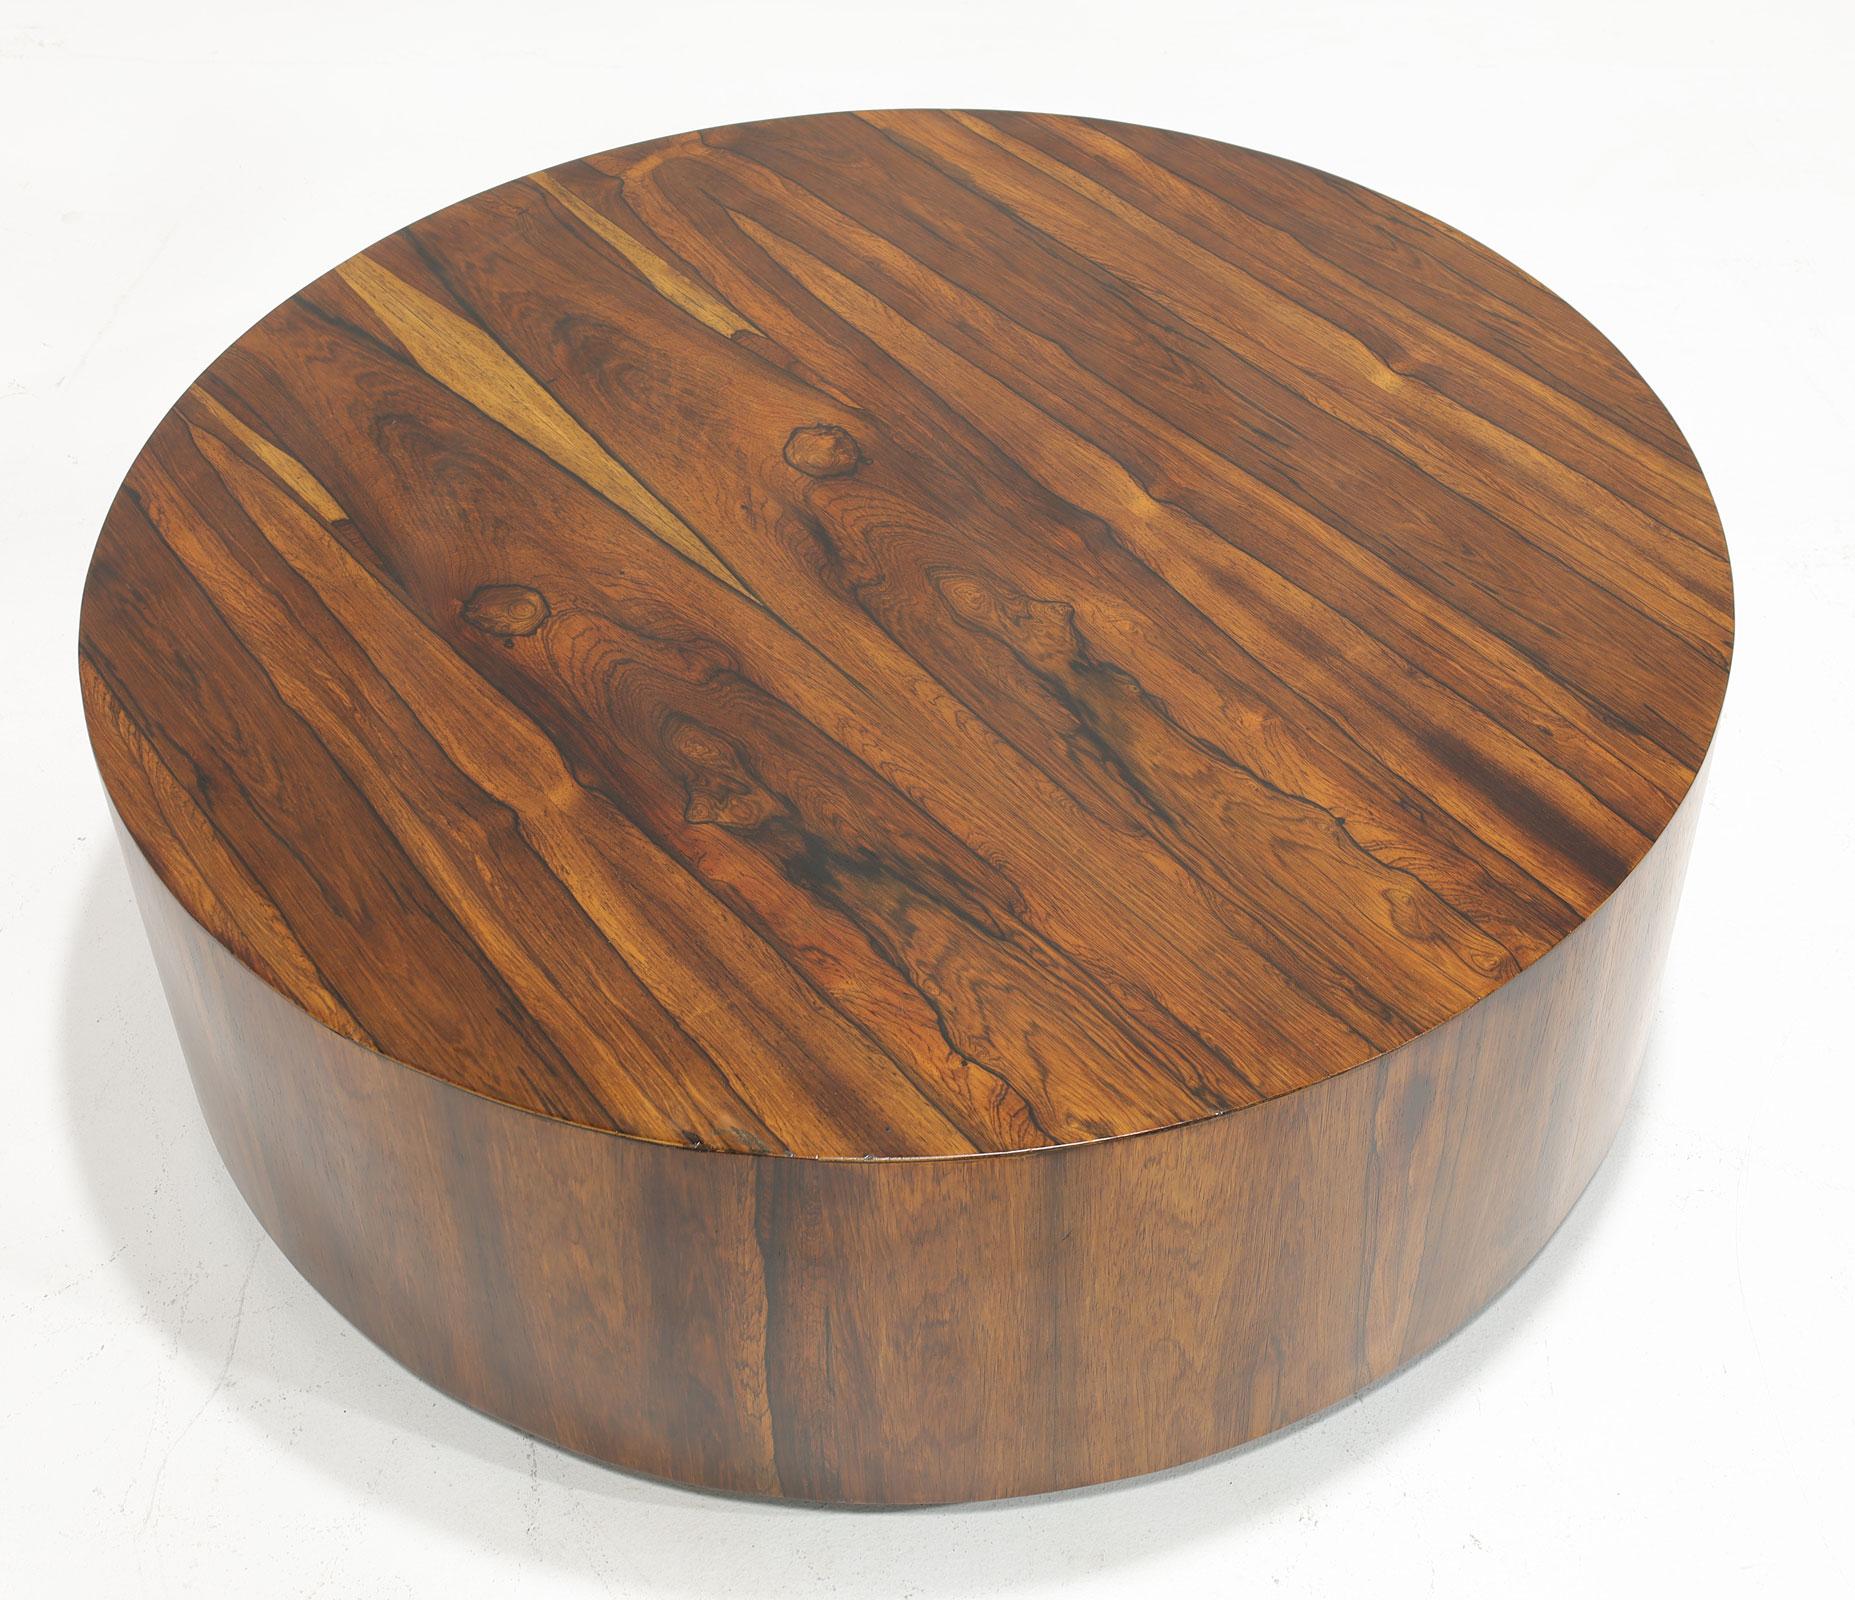 A hard-to-find beautiful rosewood round table by Milo Baughman. The table has beautifully figured graining and rest on a solid black base. 